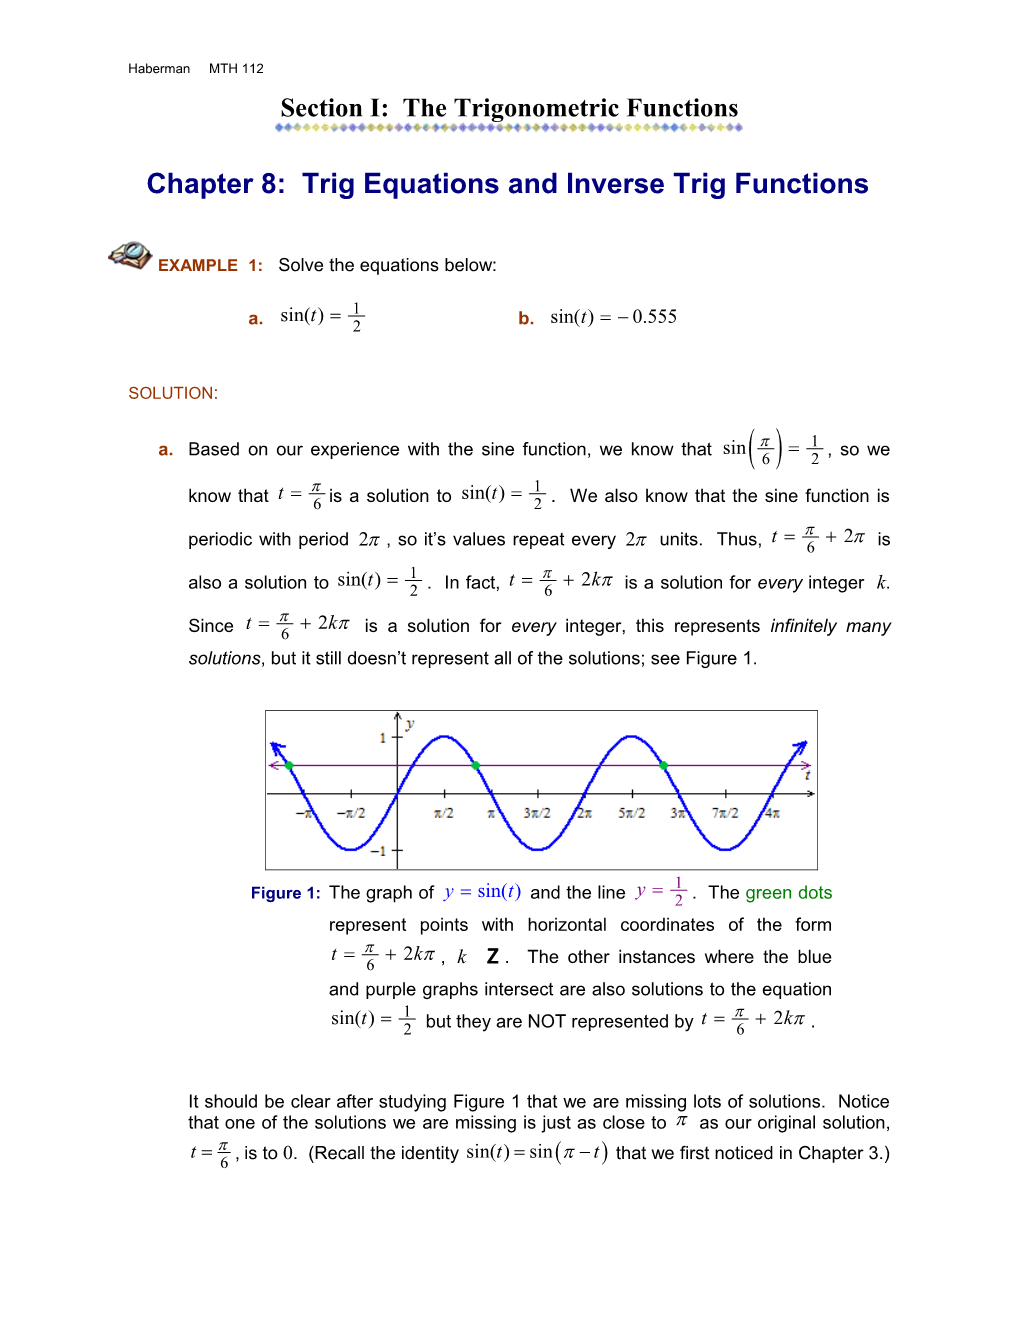 Chapter 8: Trig Equations and Inverse Trig Functions